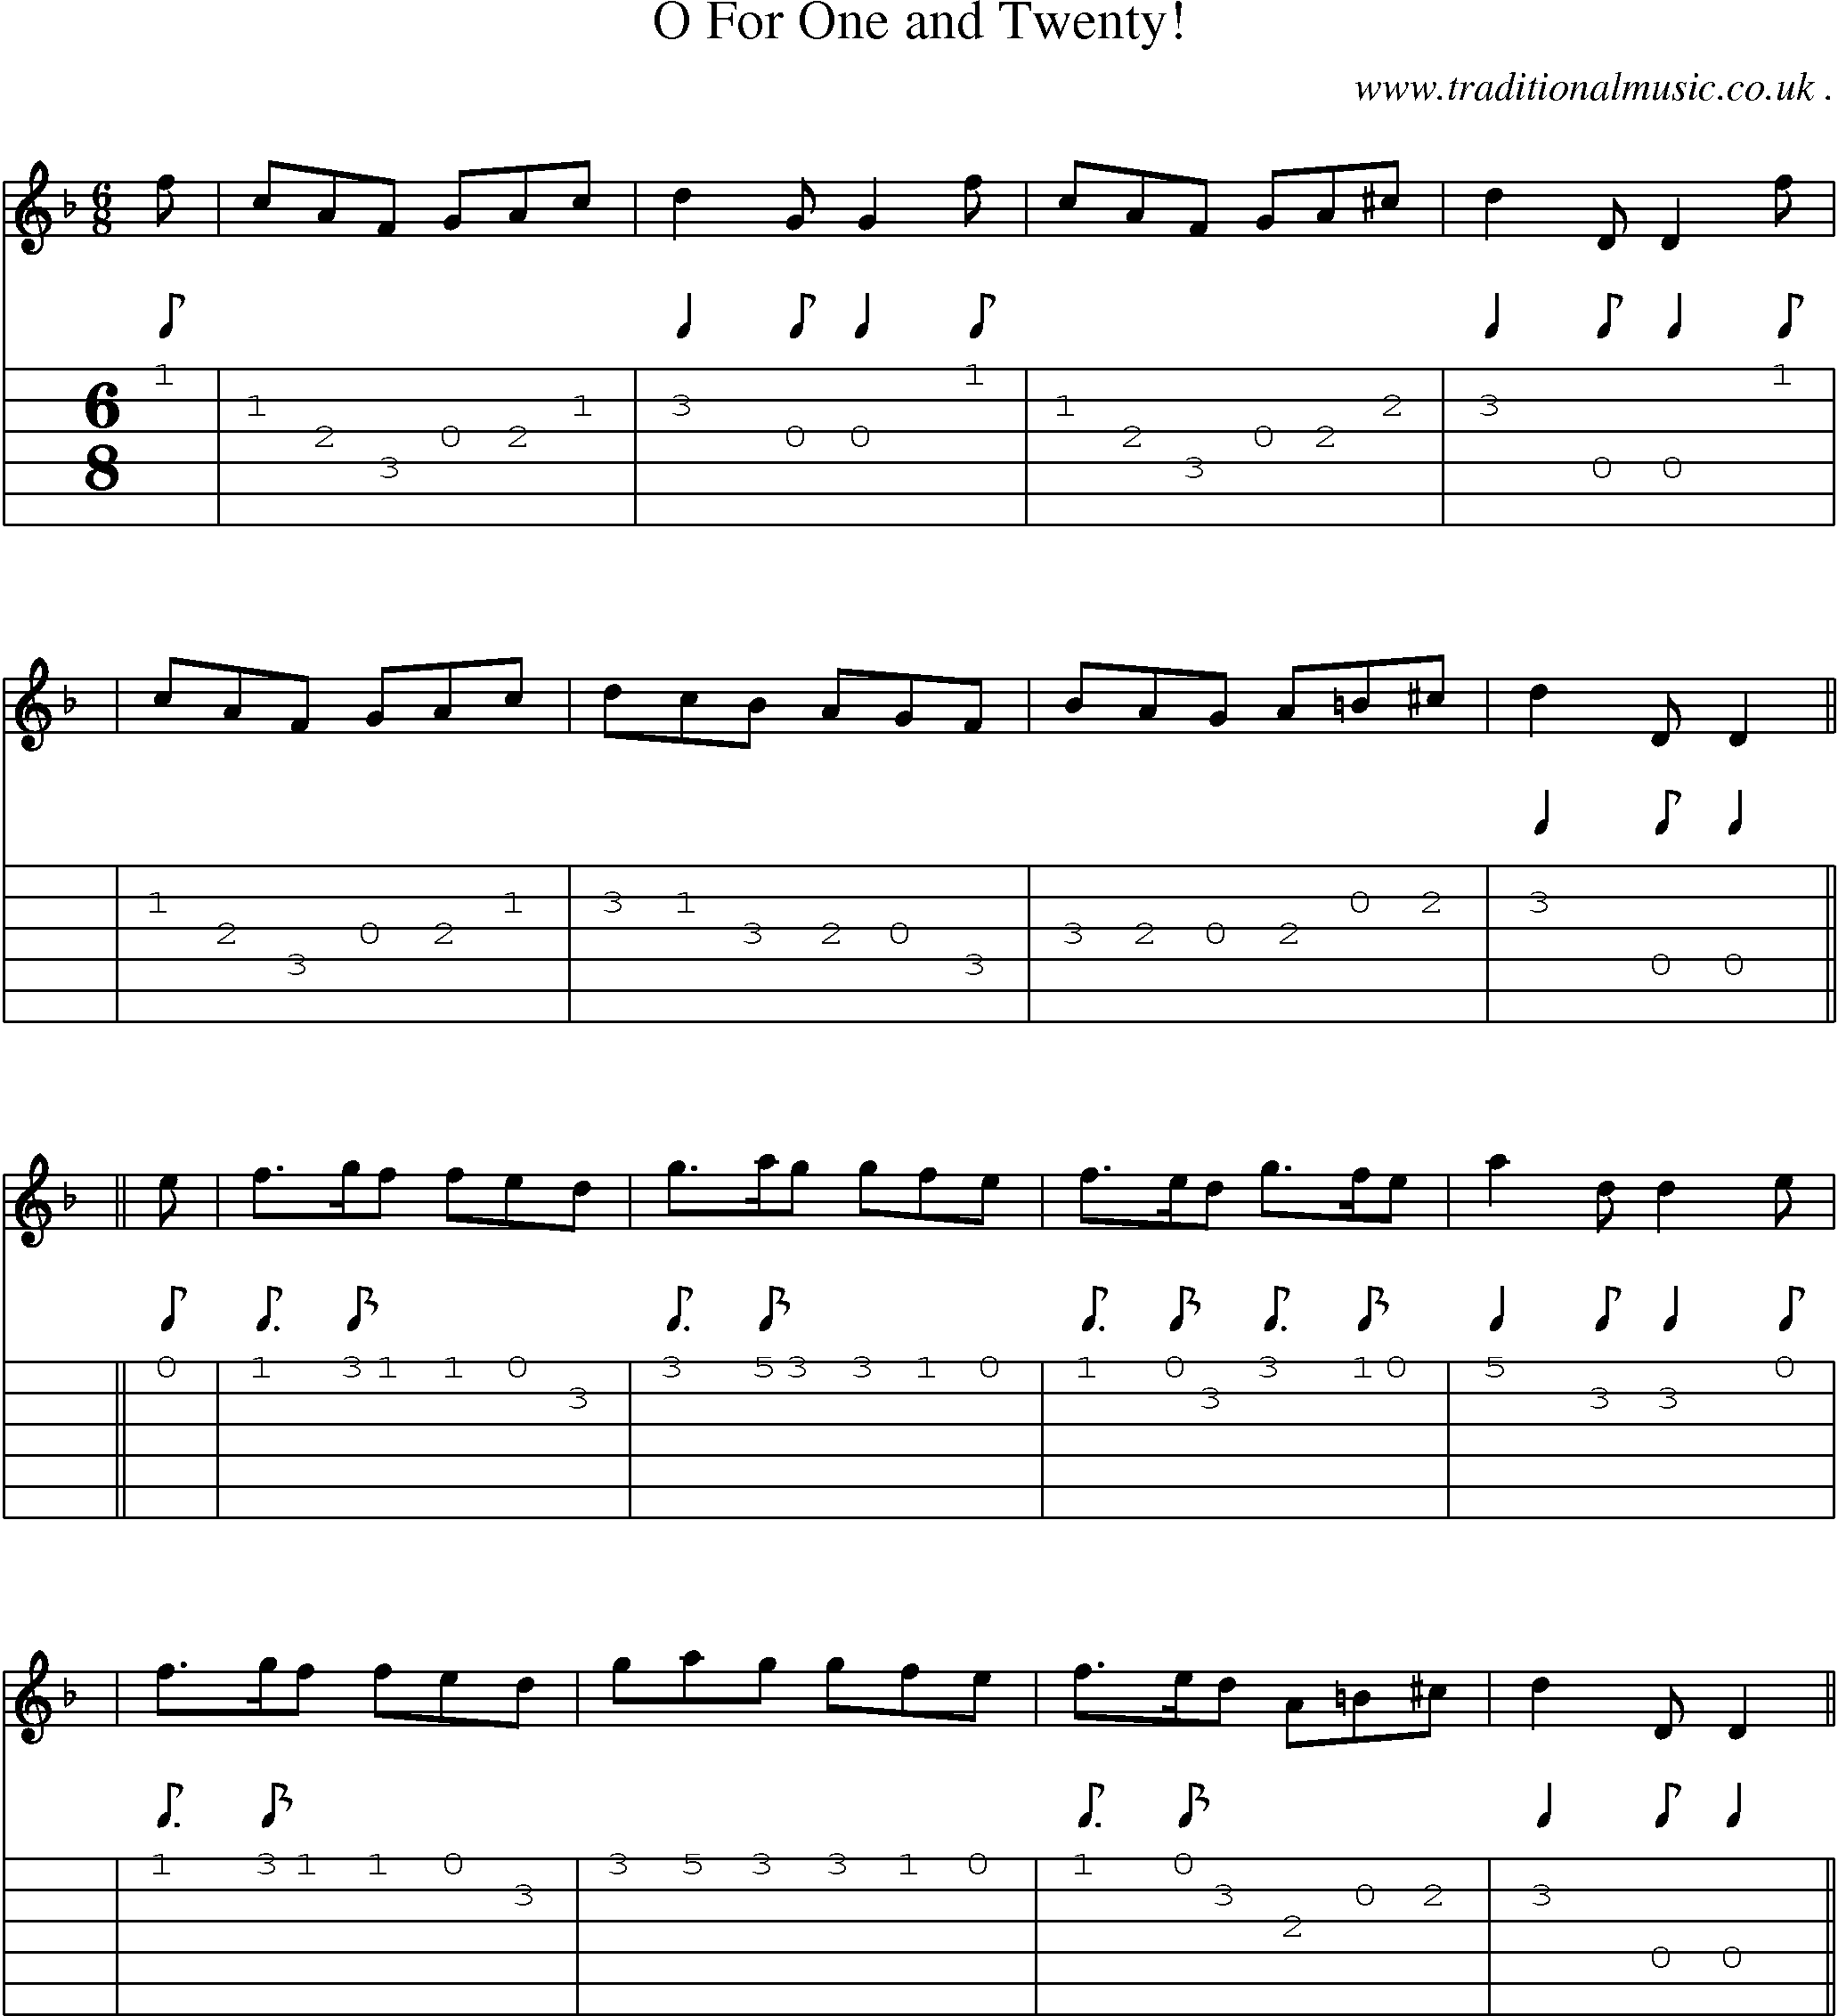 Sheet-music  score, Chords and Guitar Tabs for O For One And Twenty!